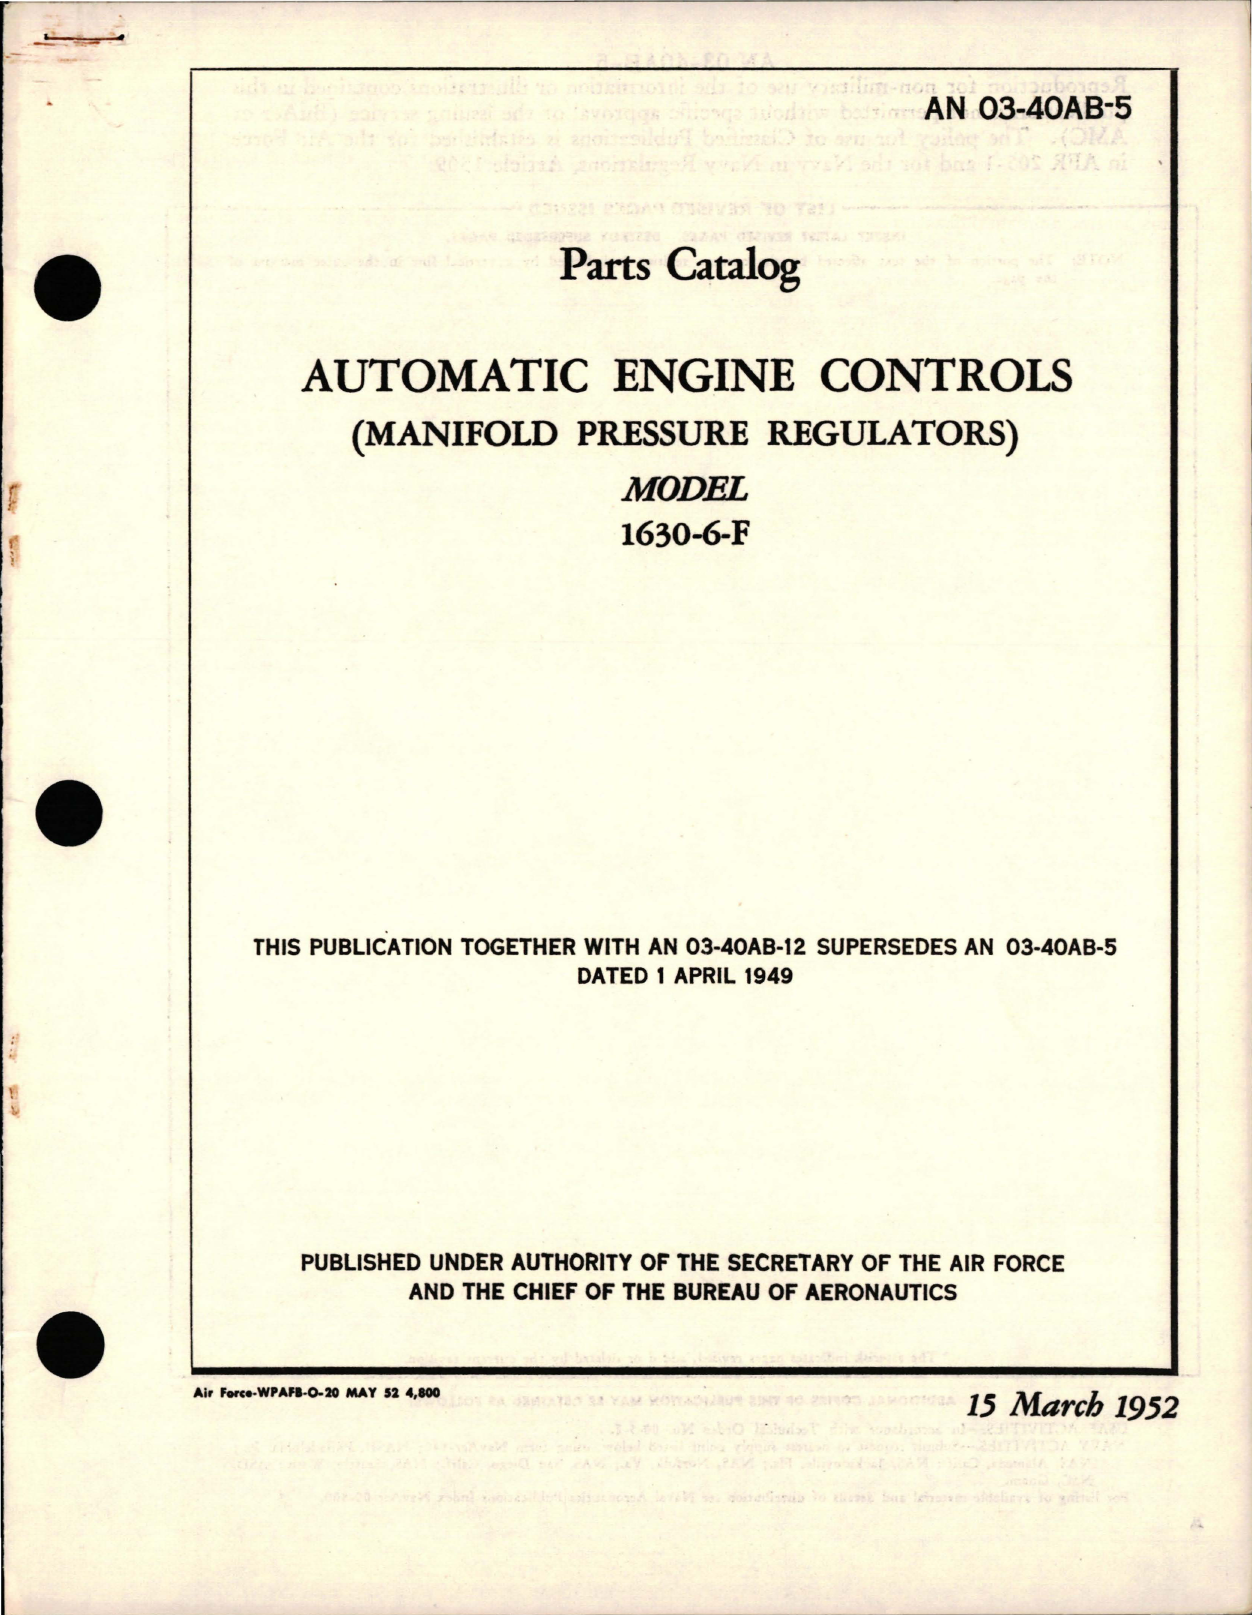 Sample page 1 from AirCorps Library document: Parts Catalog for Automatic Engine Controls (Manifold Pressure Regulators) Model 1630-6-F 